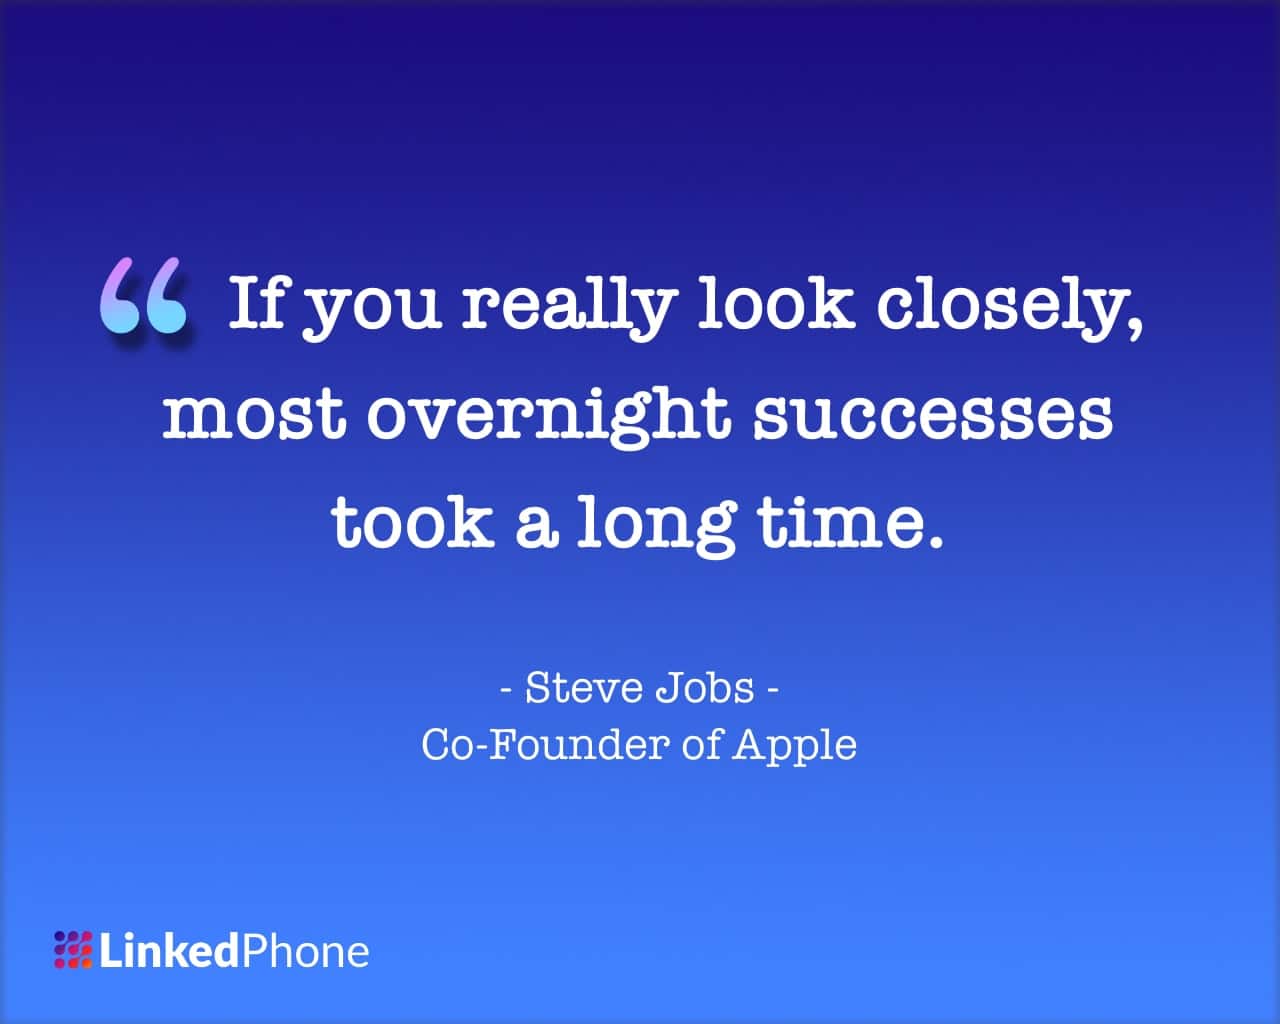 Steve Jobs Motivational Inspirational Quotes and Sayings